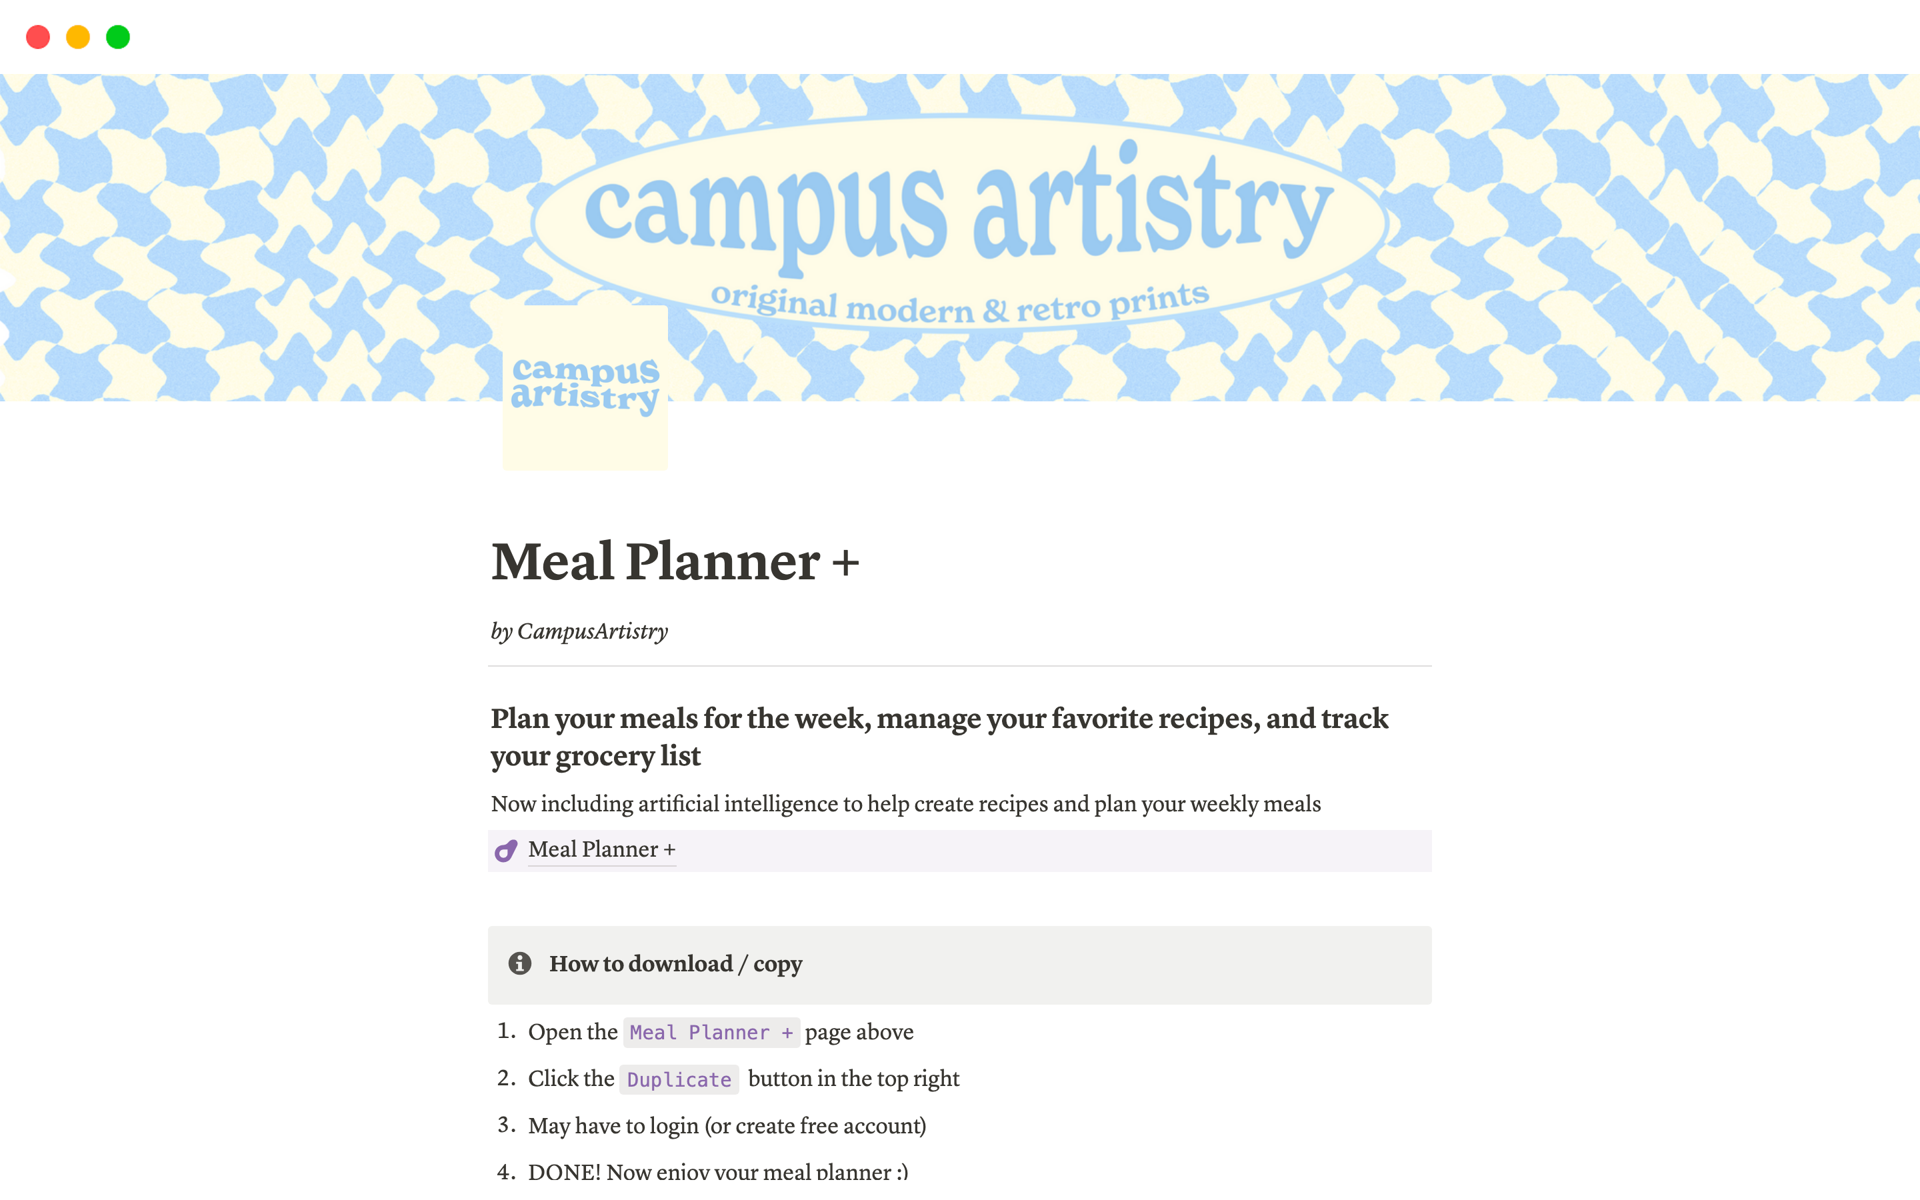 Plan your meals for the week, manage your favorite recipes, and track your grocery list